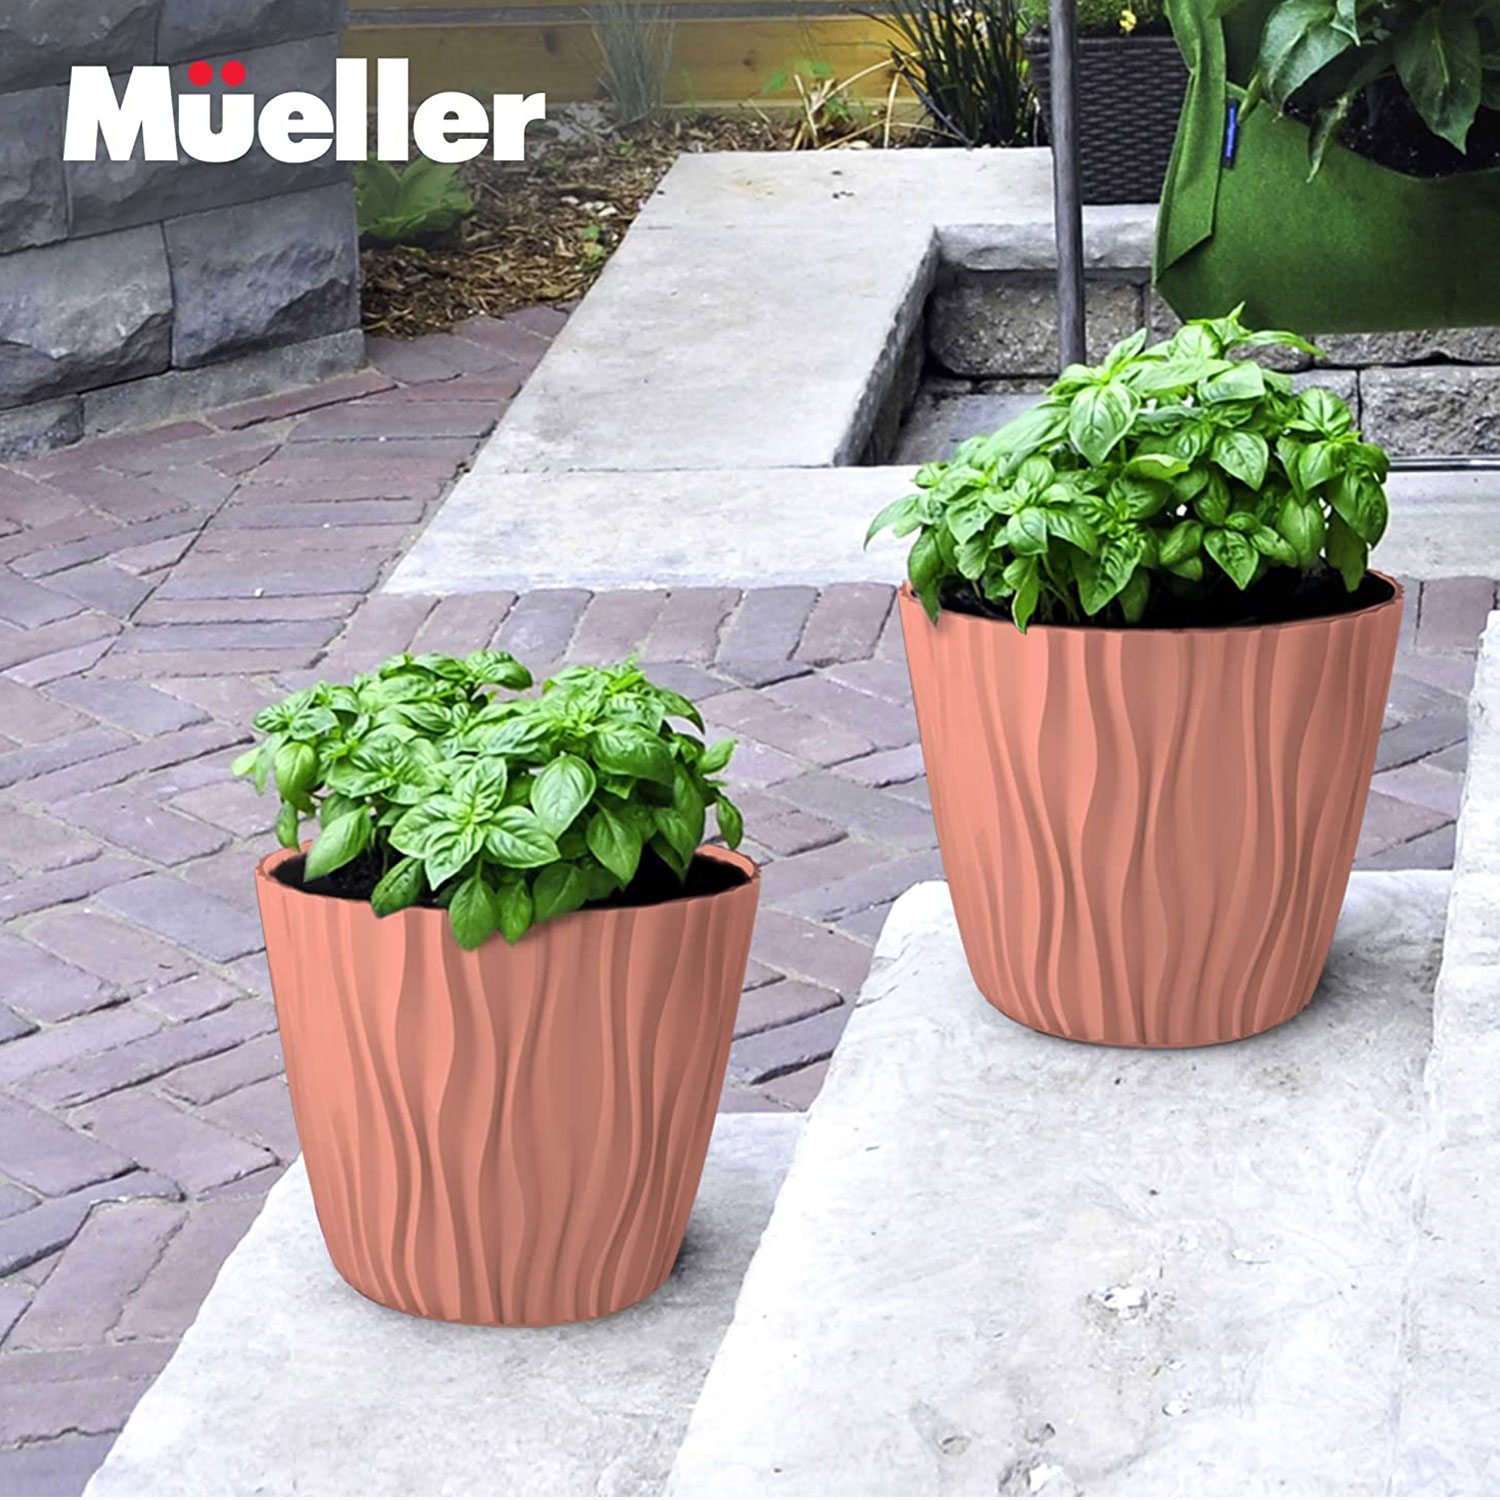 muellerhome_Decorative-Plant-and-Flower-Pots-Small-2-Piece-Pink-Set-7